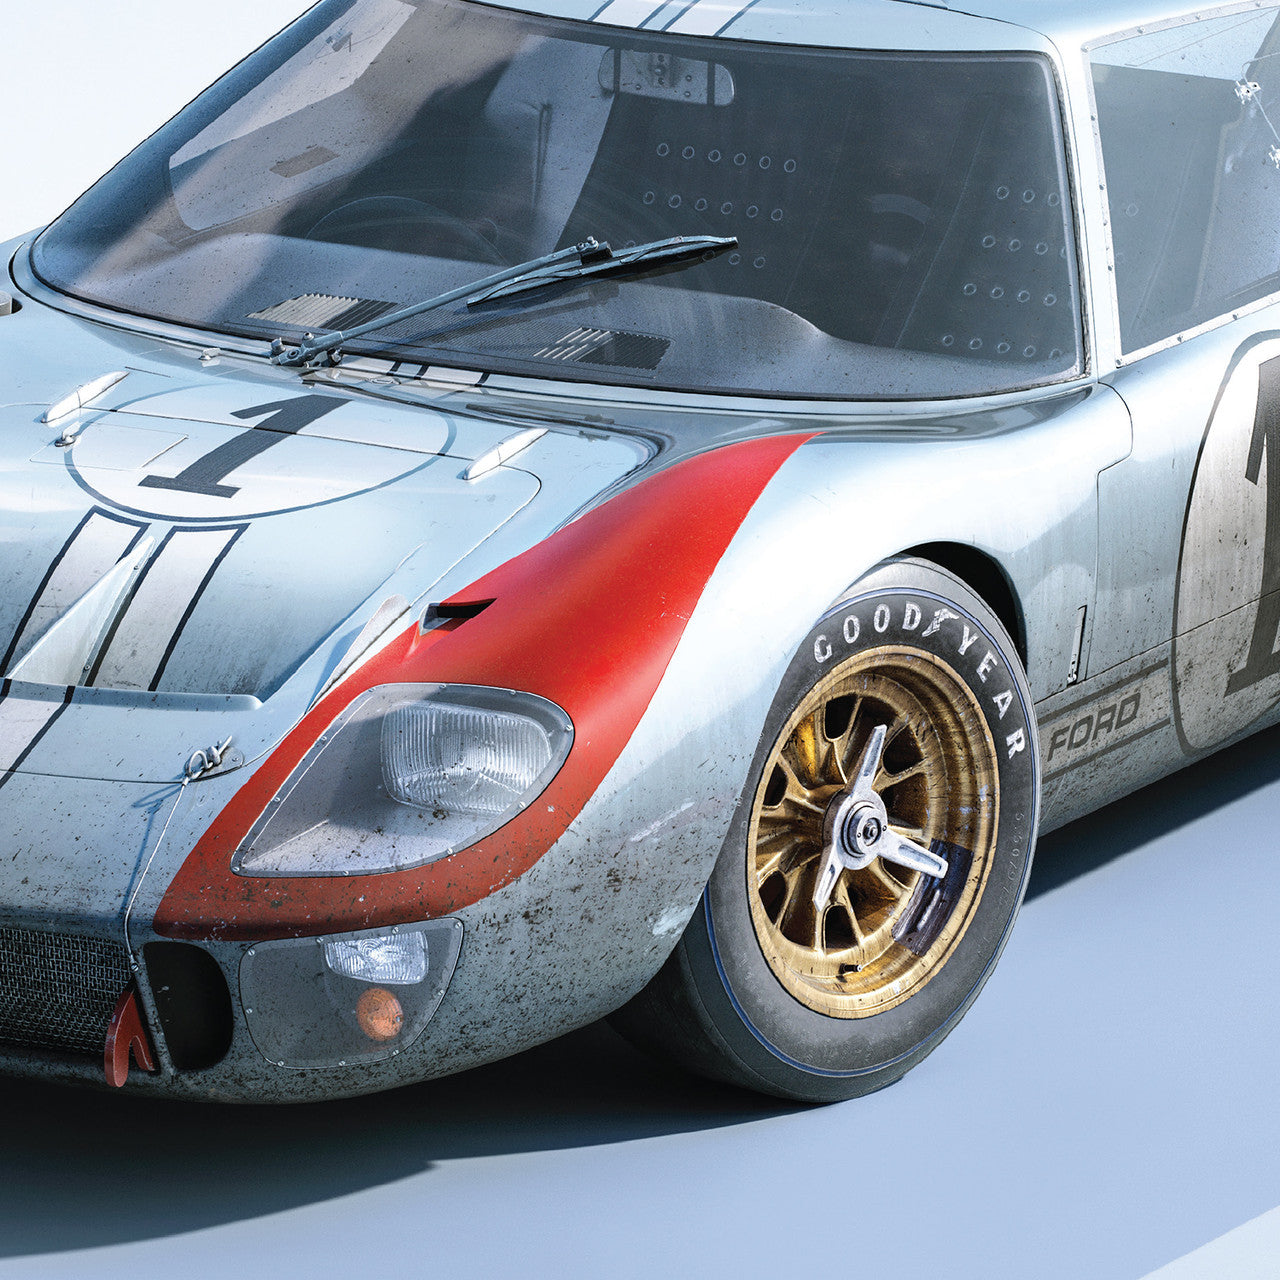 Ford GT40 - P/1015 - 24H Le Mans - 1966 | Collector’s Edition